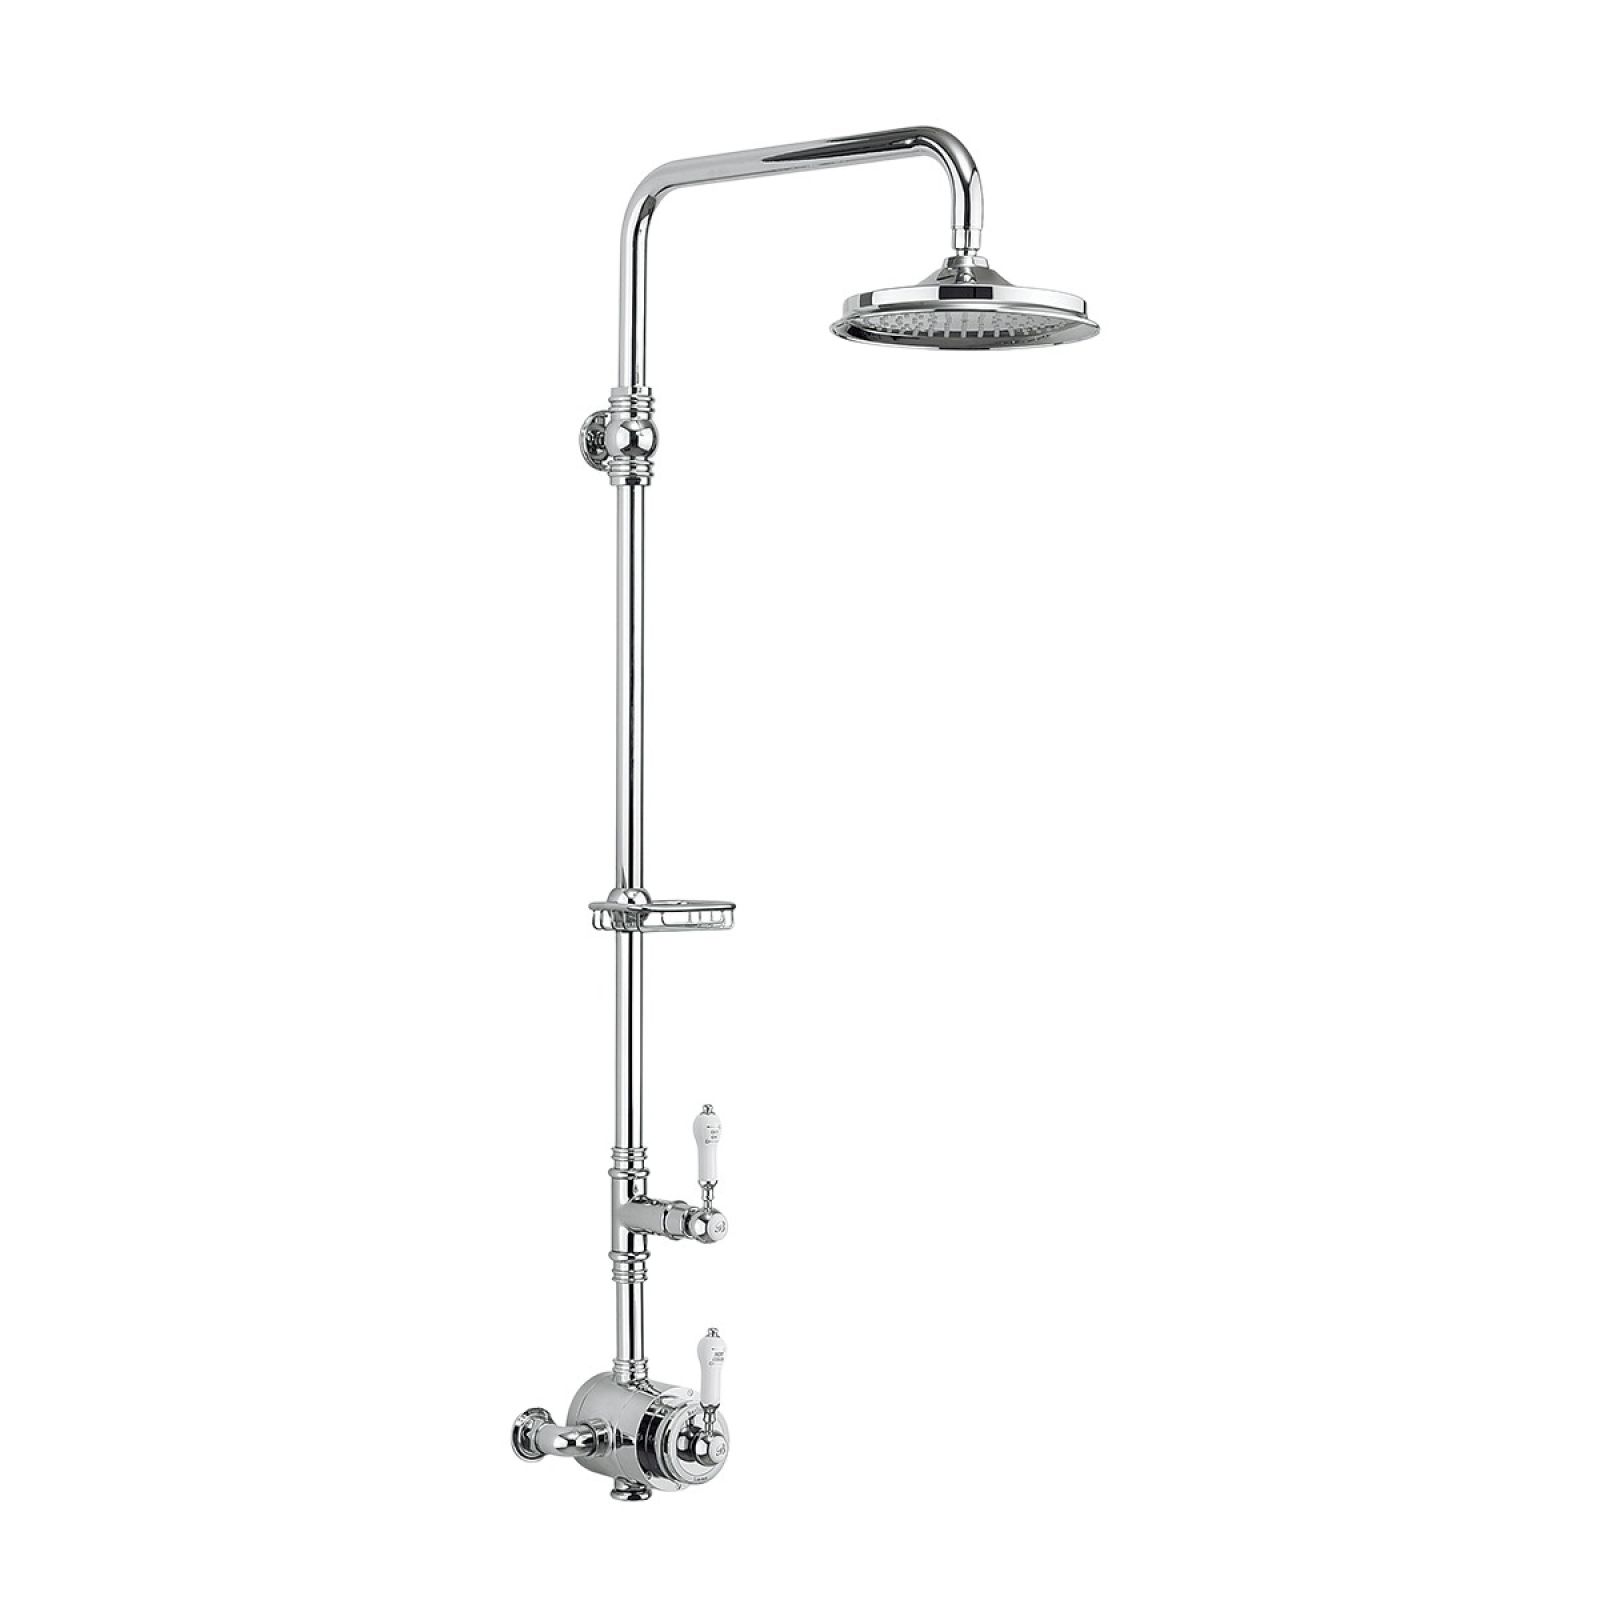 Stowe Thermostatic Exposed Shower Valve Single Outlet, Rigid Riser, Fixed Shower Arm & Soap Basket